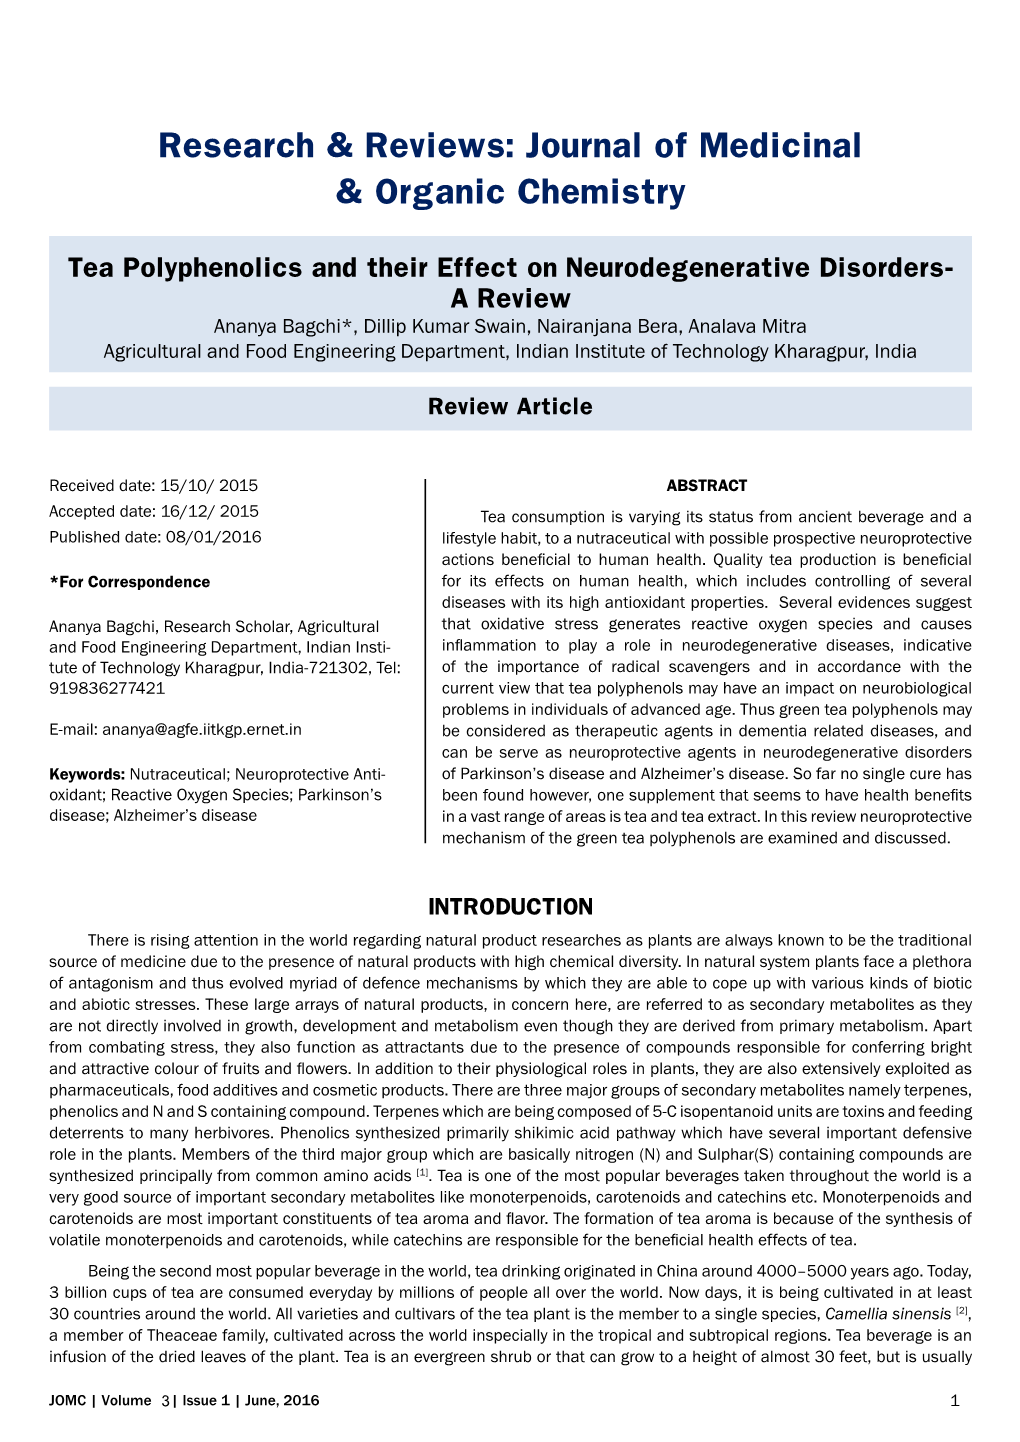 Tea Polyphenolics and Their Effect on Neurodegenerative Disorders-A